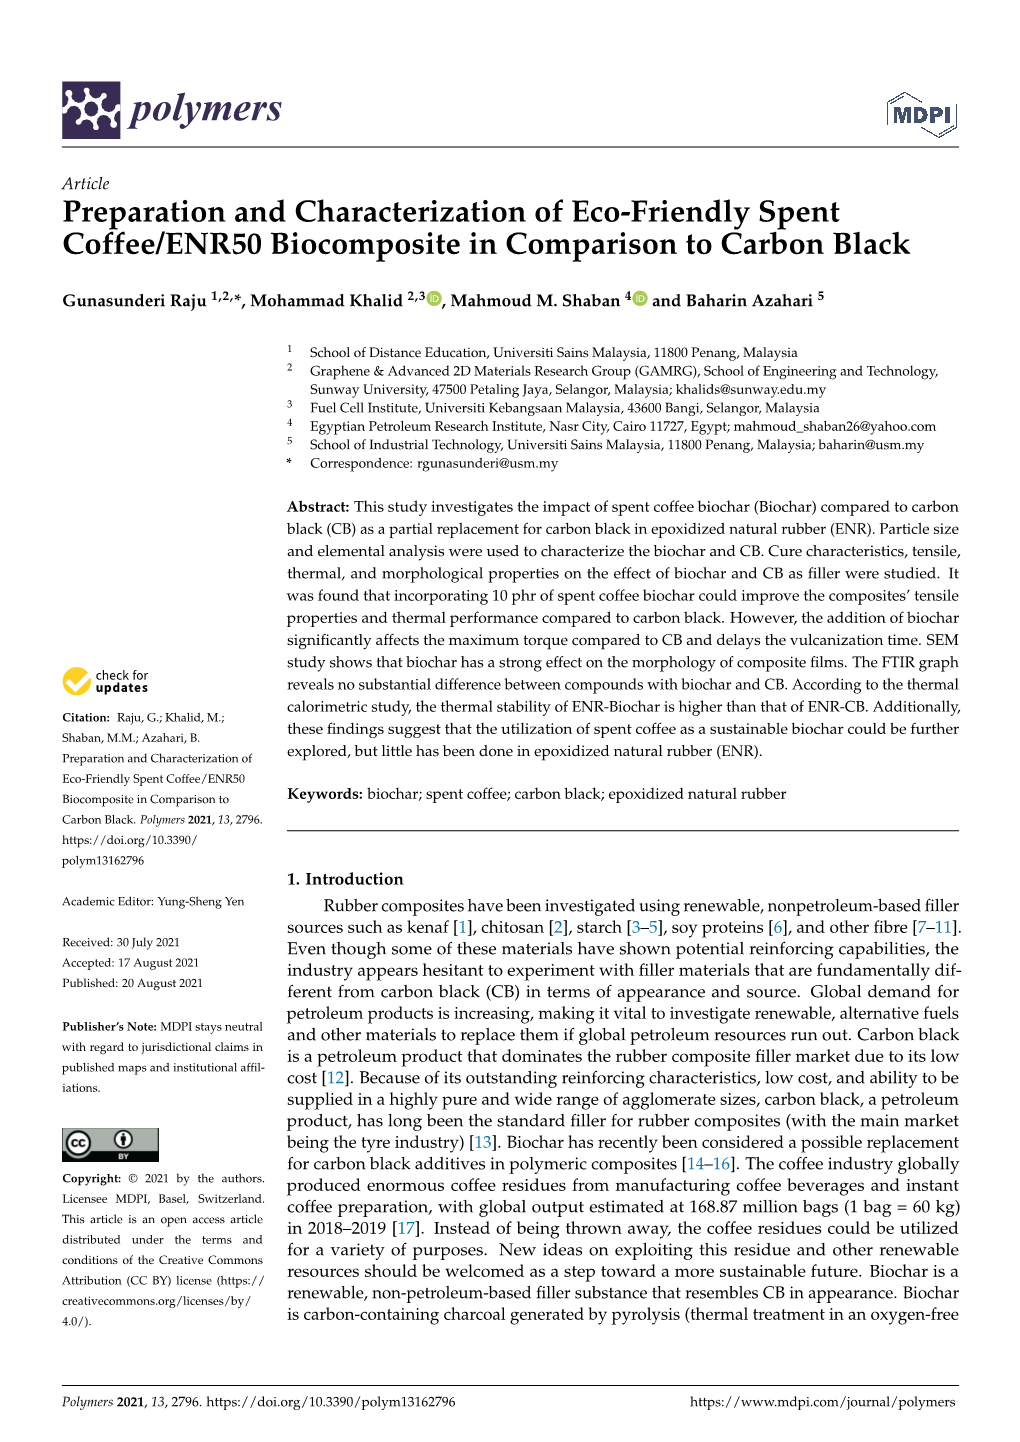 Preparation and Characterization of Eco-Friendly Spent Coffee/ENR50 Biocomposite in Comparison to Carbon Black